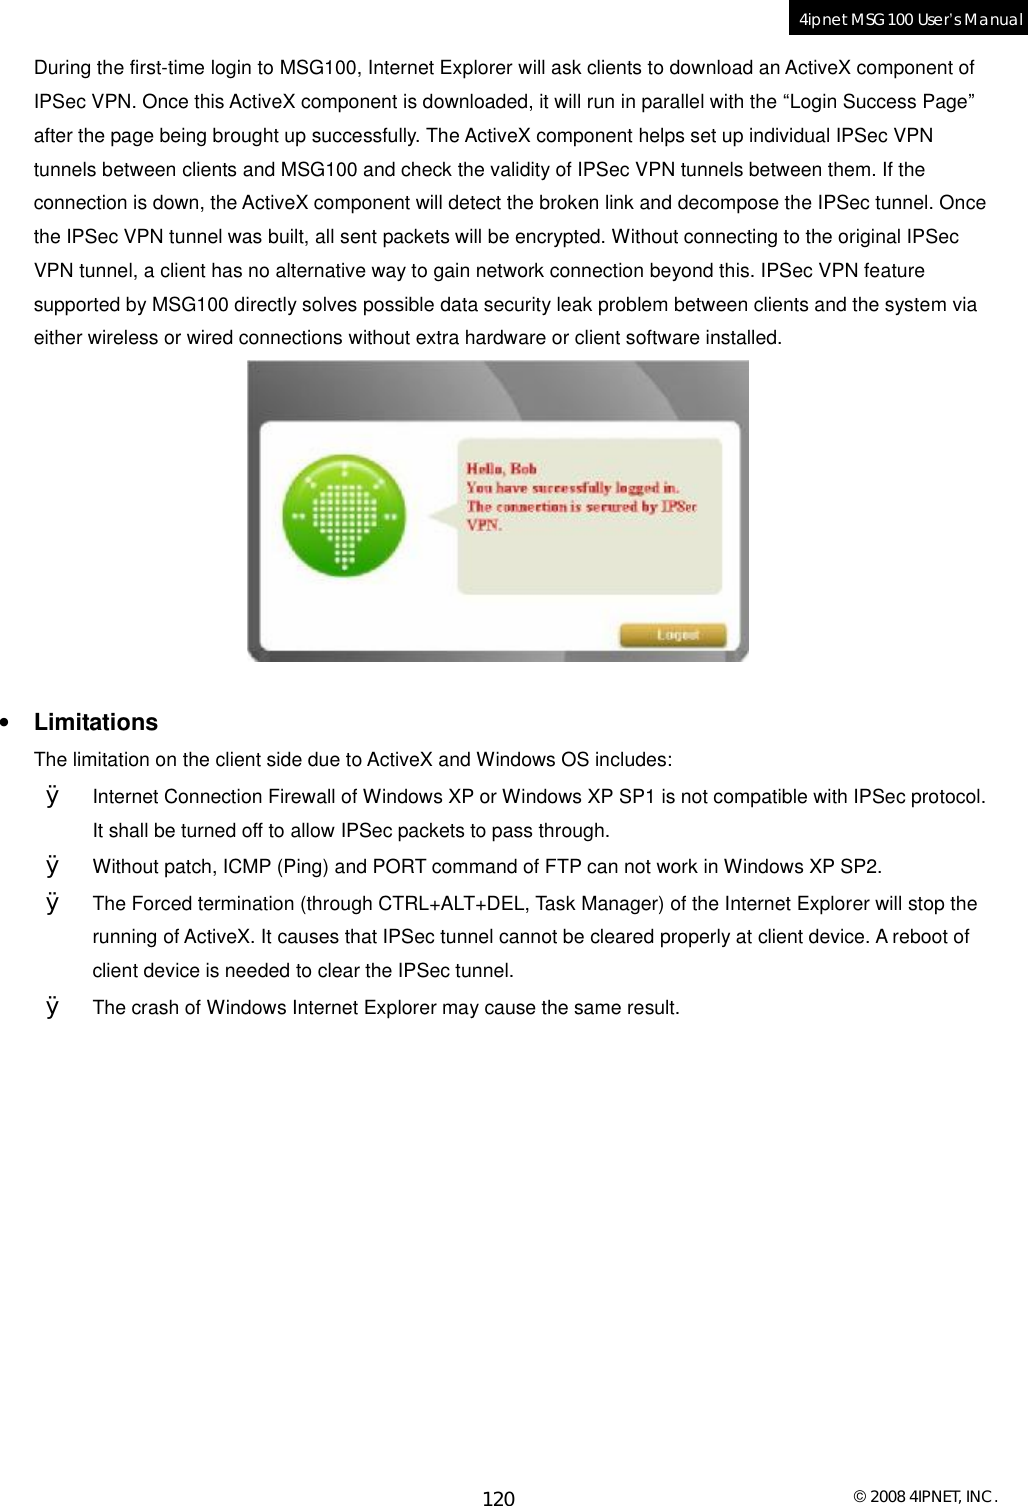  © 2008 4IPNET, INC. 120 4ipnet MSG100 User’s Manual  During the first-time login to MSG100, Internet Explorer will ask clients to download an ActiveX component of IPSec VPN. Once this ActiveX component is downloaded, it will run in parallel with the “Login Success Page” after the page being brought up successfully. The ActiveX component helps set up individual IPSec VPN tunnels between clients and MSG100 and check the validity of IPSec VPN tunnels between them. If the connection is down, the ActiveX component will detect the broken link and decompose the IPSec tunnel. Once the IPSec VPN tunnel was built, all sent packets will be encrypted. Without connecting to the original IPSec VPN tunnel, a client has no alternative way to gain network connection beyond this. IPSec VPN feature supported by MSG100 directly solves possible data security leak problem between clients and the system via either wireless or wired connections without extra hardware or client software installed.   • Limitations The limitation on the client side due to ActiveX and Windows OS includes: Ø Internet Connection Firewall of Windows XP or Windows XP SP1 is not compatible with IPSec protocol. It shall be turned off to allow IPSec packets to pass through. Ø Without patch, ICMP (Ping) and PORT command of FTP can not work in Windows XP SP2. Ø The Forced termination (through CTRL+ALT+DEL, Task Manager) of the Internet Explorer will stop the running of ActiveX. It causes that IPSec tunnel cannot be cleared properly at client device. A reboot of client device is needed to clear the IPSec tunnel.   Ø The crash of Windows Internet Explorer may cause the same result.   